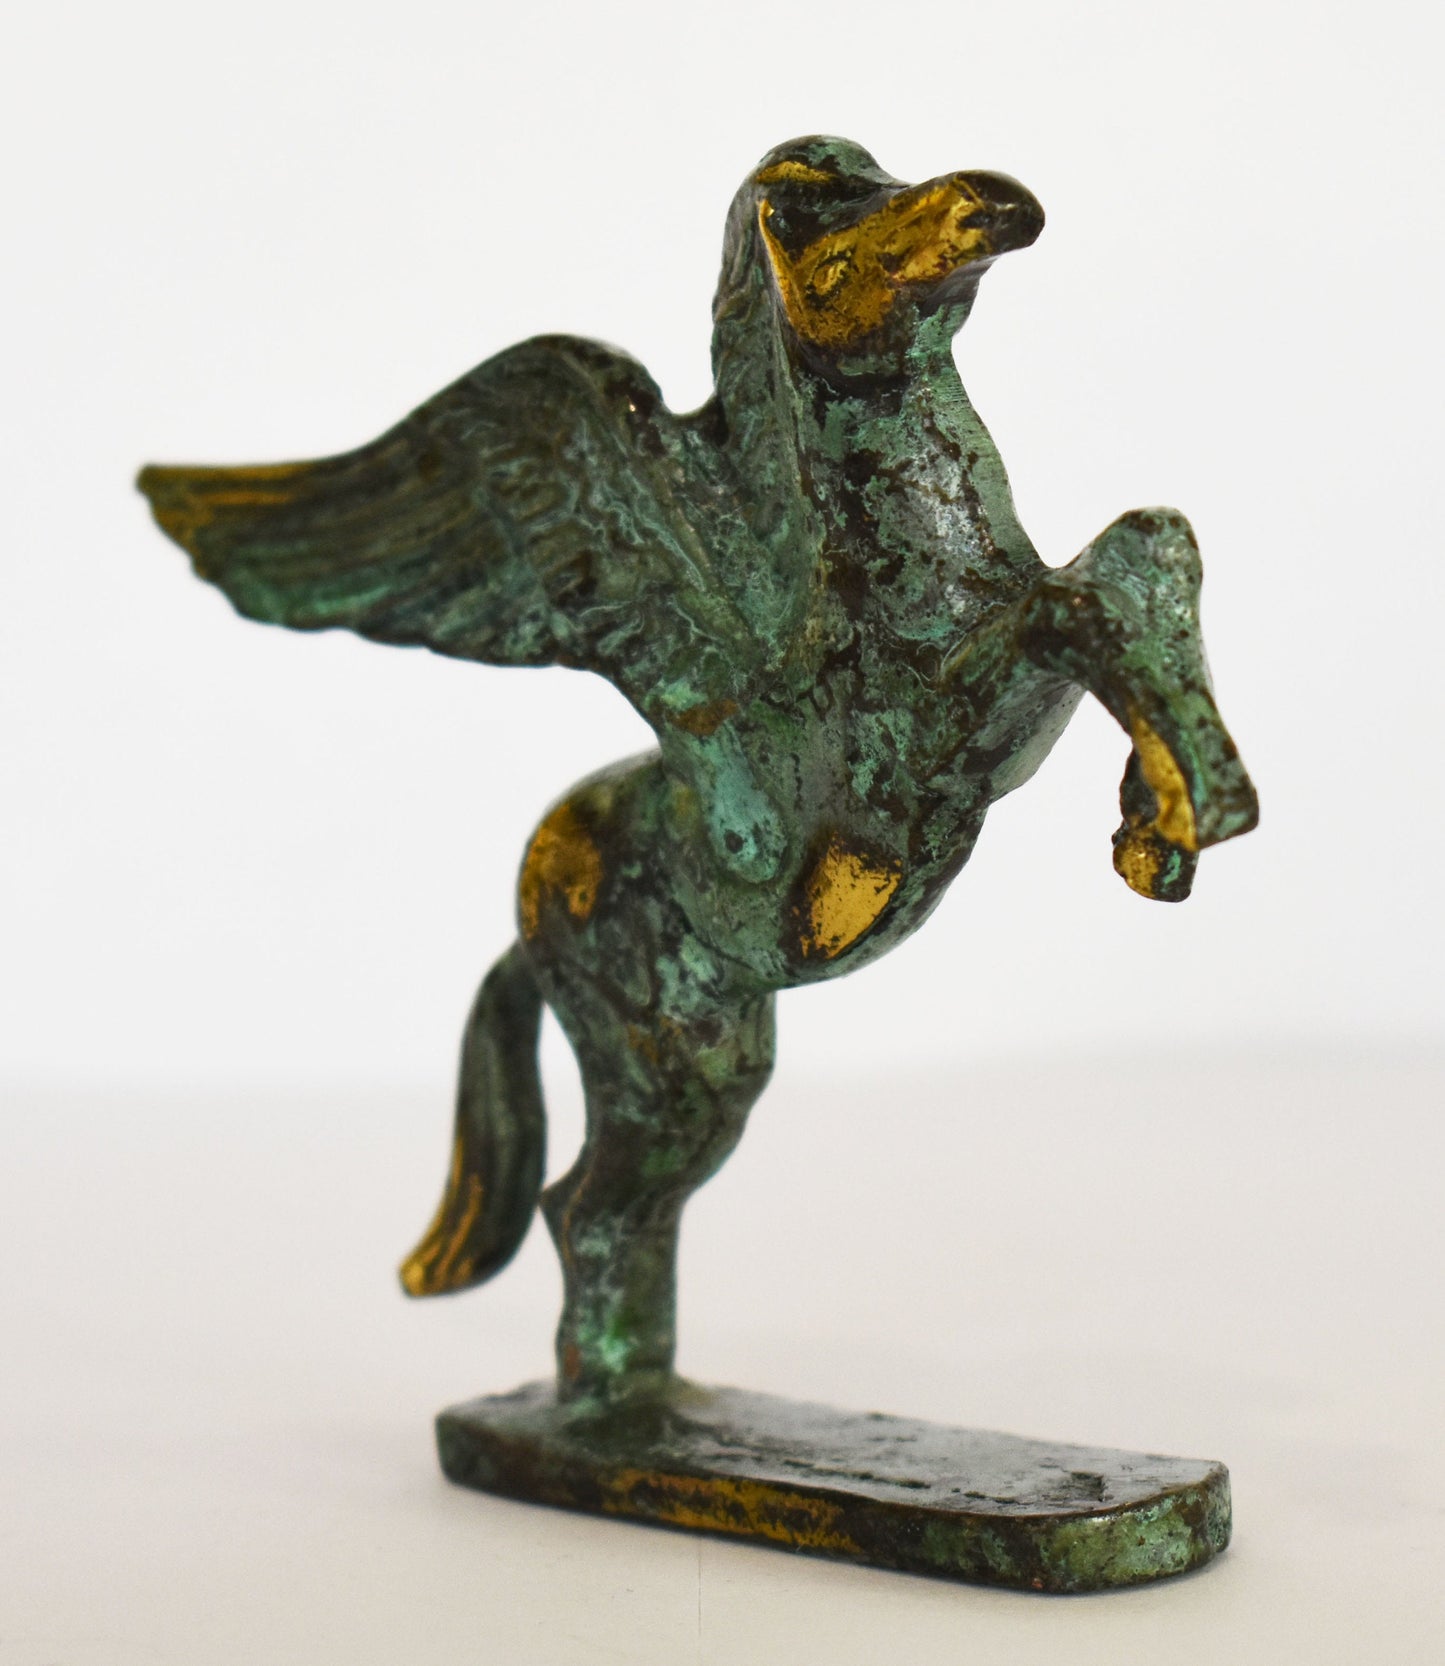 Pegasus - Mythical Immortal Winged Divine Horse - Bellerophon defeats Chimera - Constellation - Small - pure Bronze Sculpture